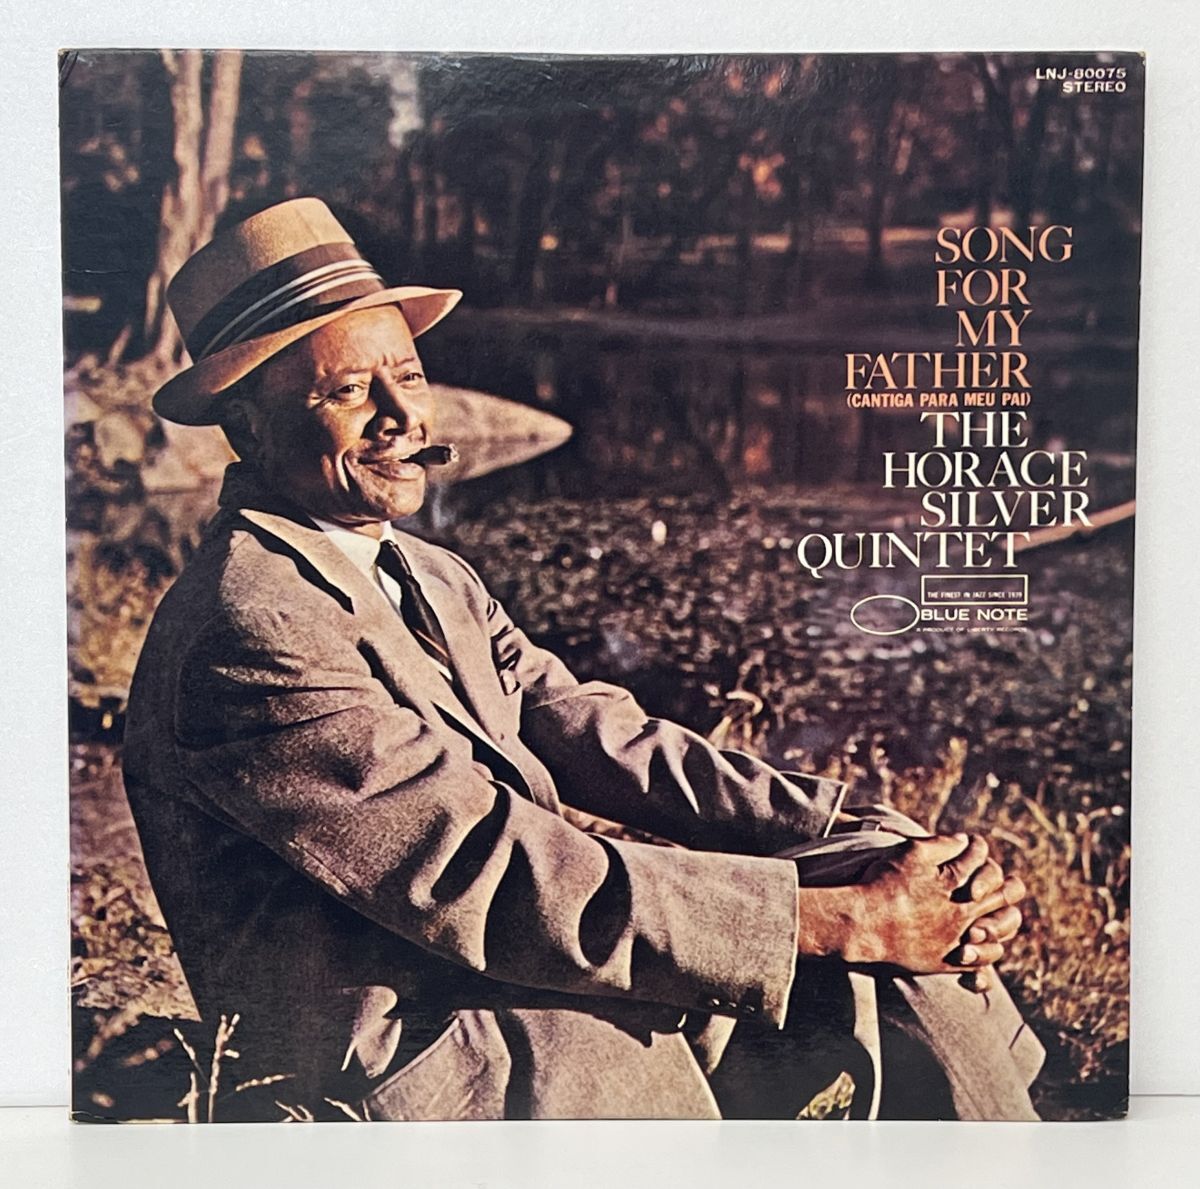 LP盤レコード/THE HORACE SILVER QUINTET ホレス・シルヴァー/SONG FOR MY FATHER/BLUE NOTE/解説書付き/LNJ-80075【M005】の画像1